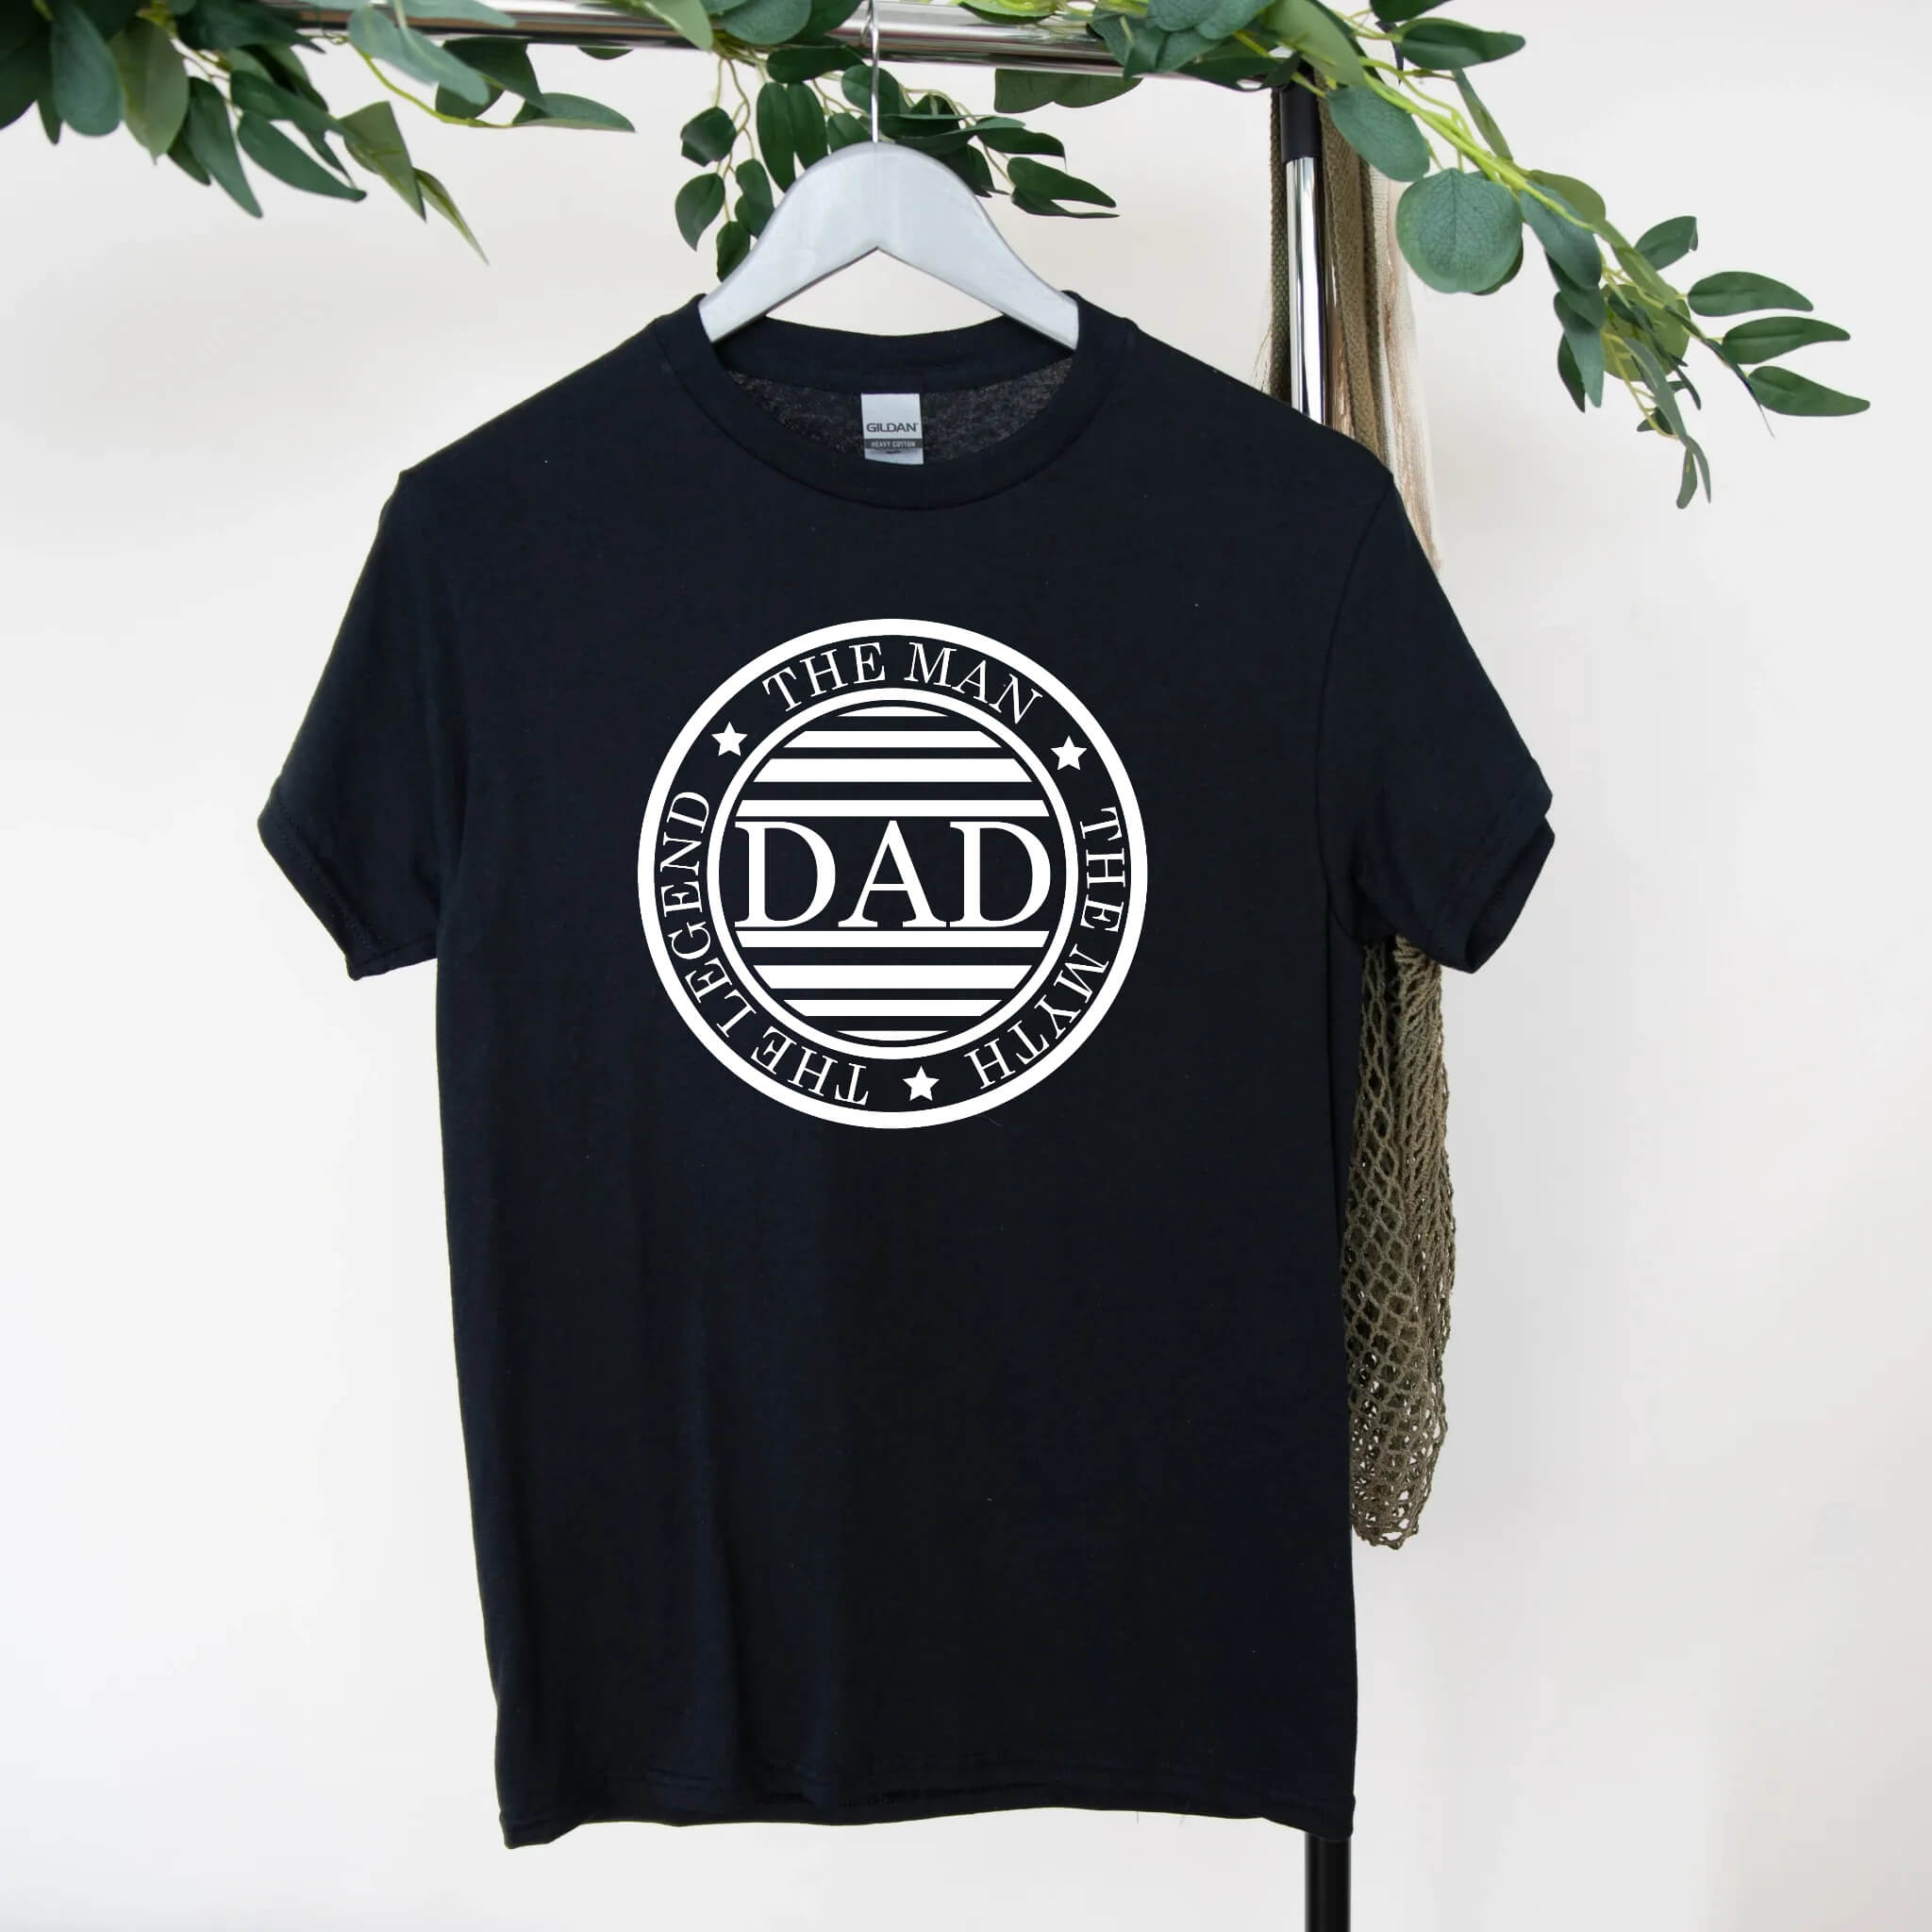 Dad The Man The Myth The Legend T-Shirt Classic Birthday Christmas Father's Day Husband Gift